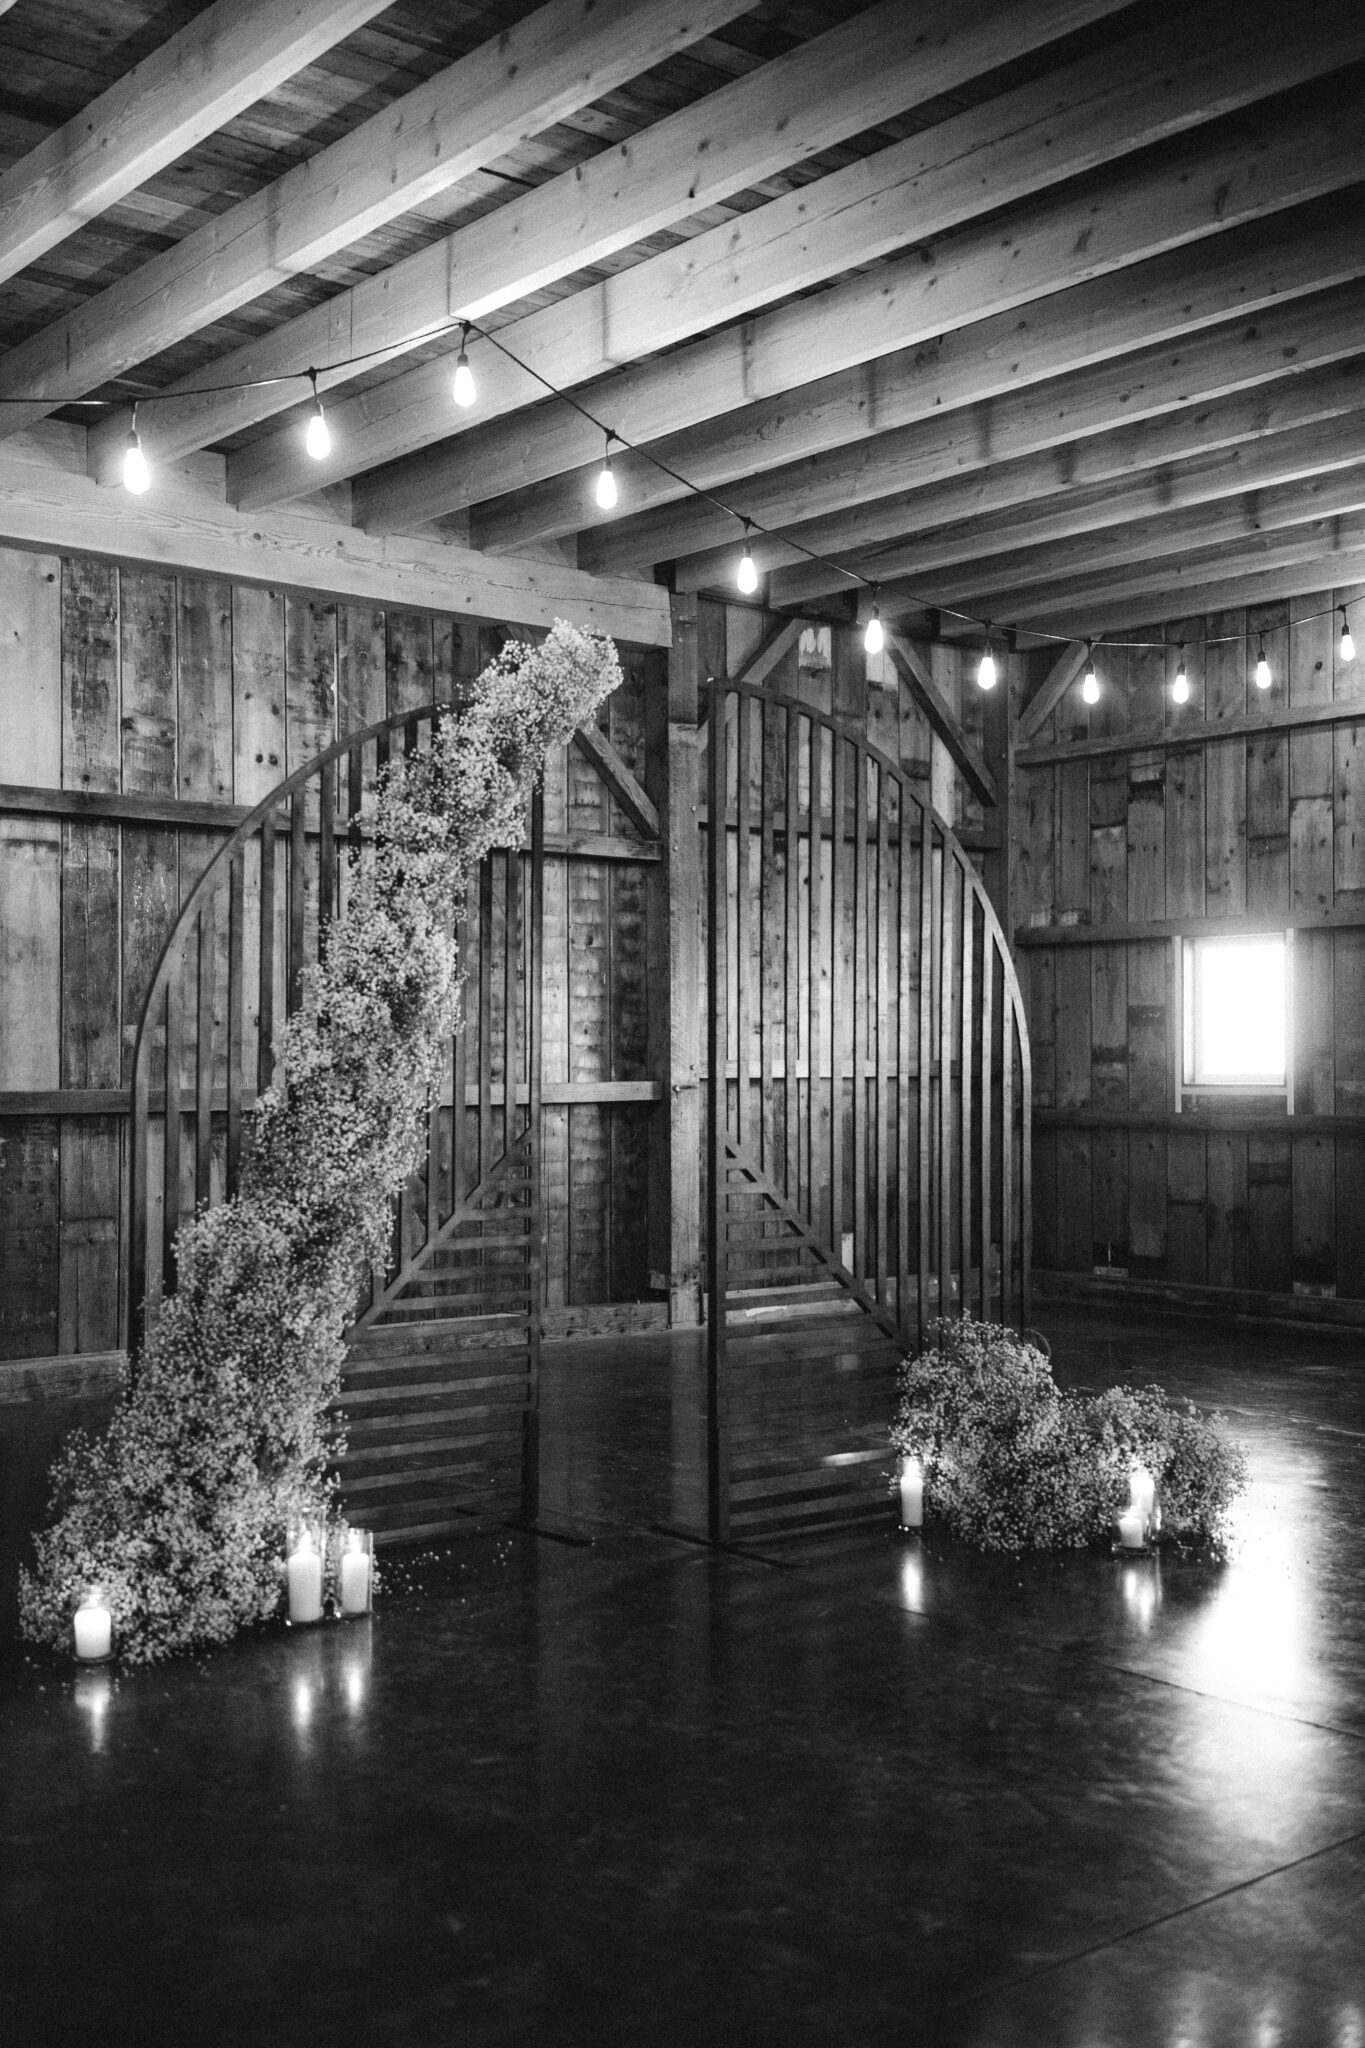 Modern whimsical baby's breath installation for the ceremony arch at this Country Chic wedding, paired with romantic candlelight for a warm cozy winter wedding ceremony.